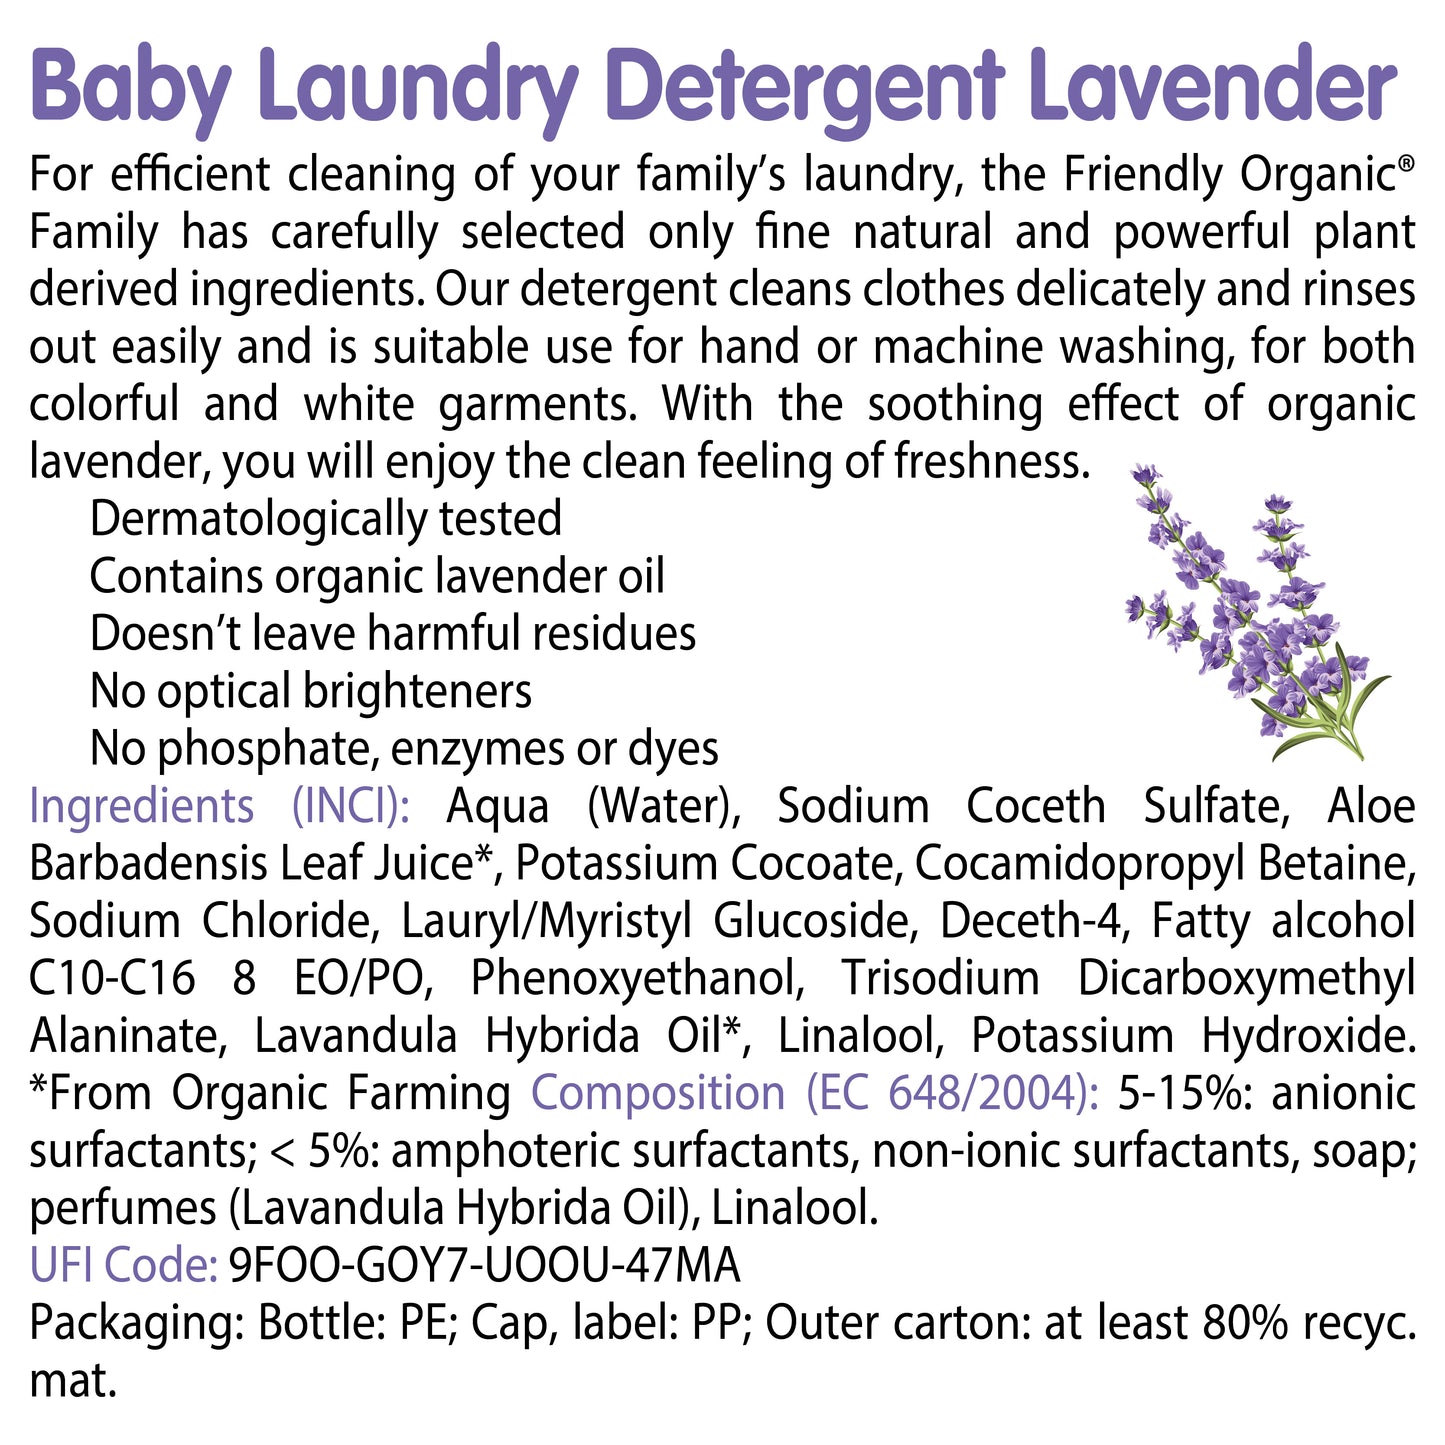 Friendly Organic Baby Laundry Detergent 2L PACK OF 2 LAVENDER